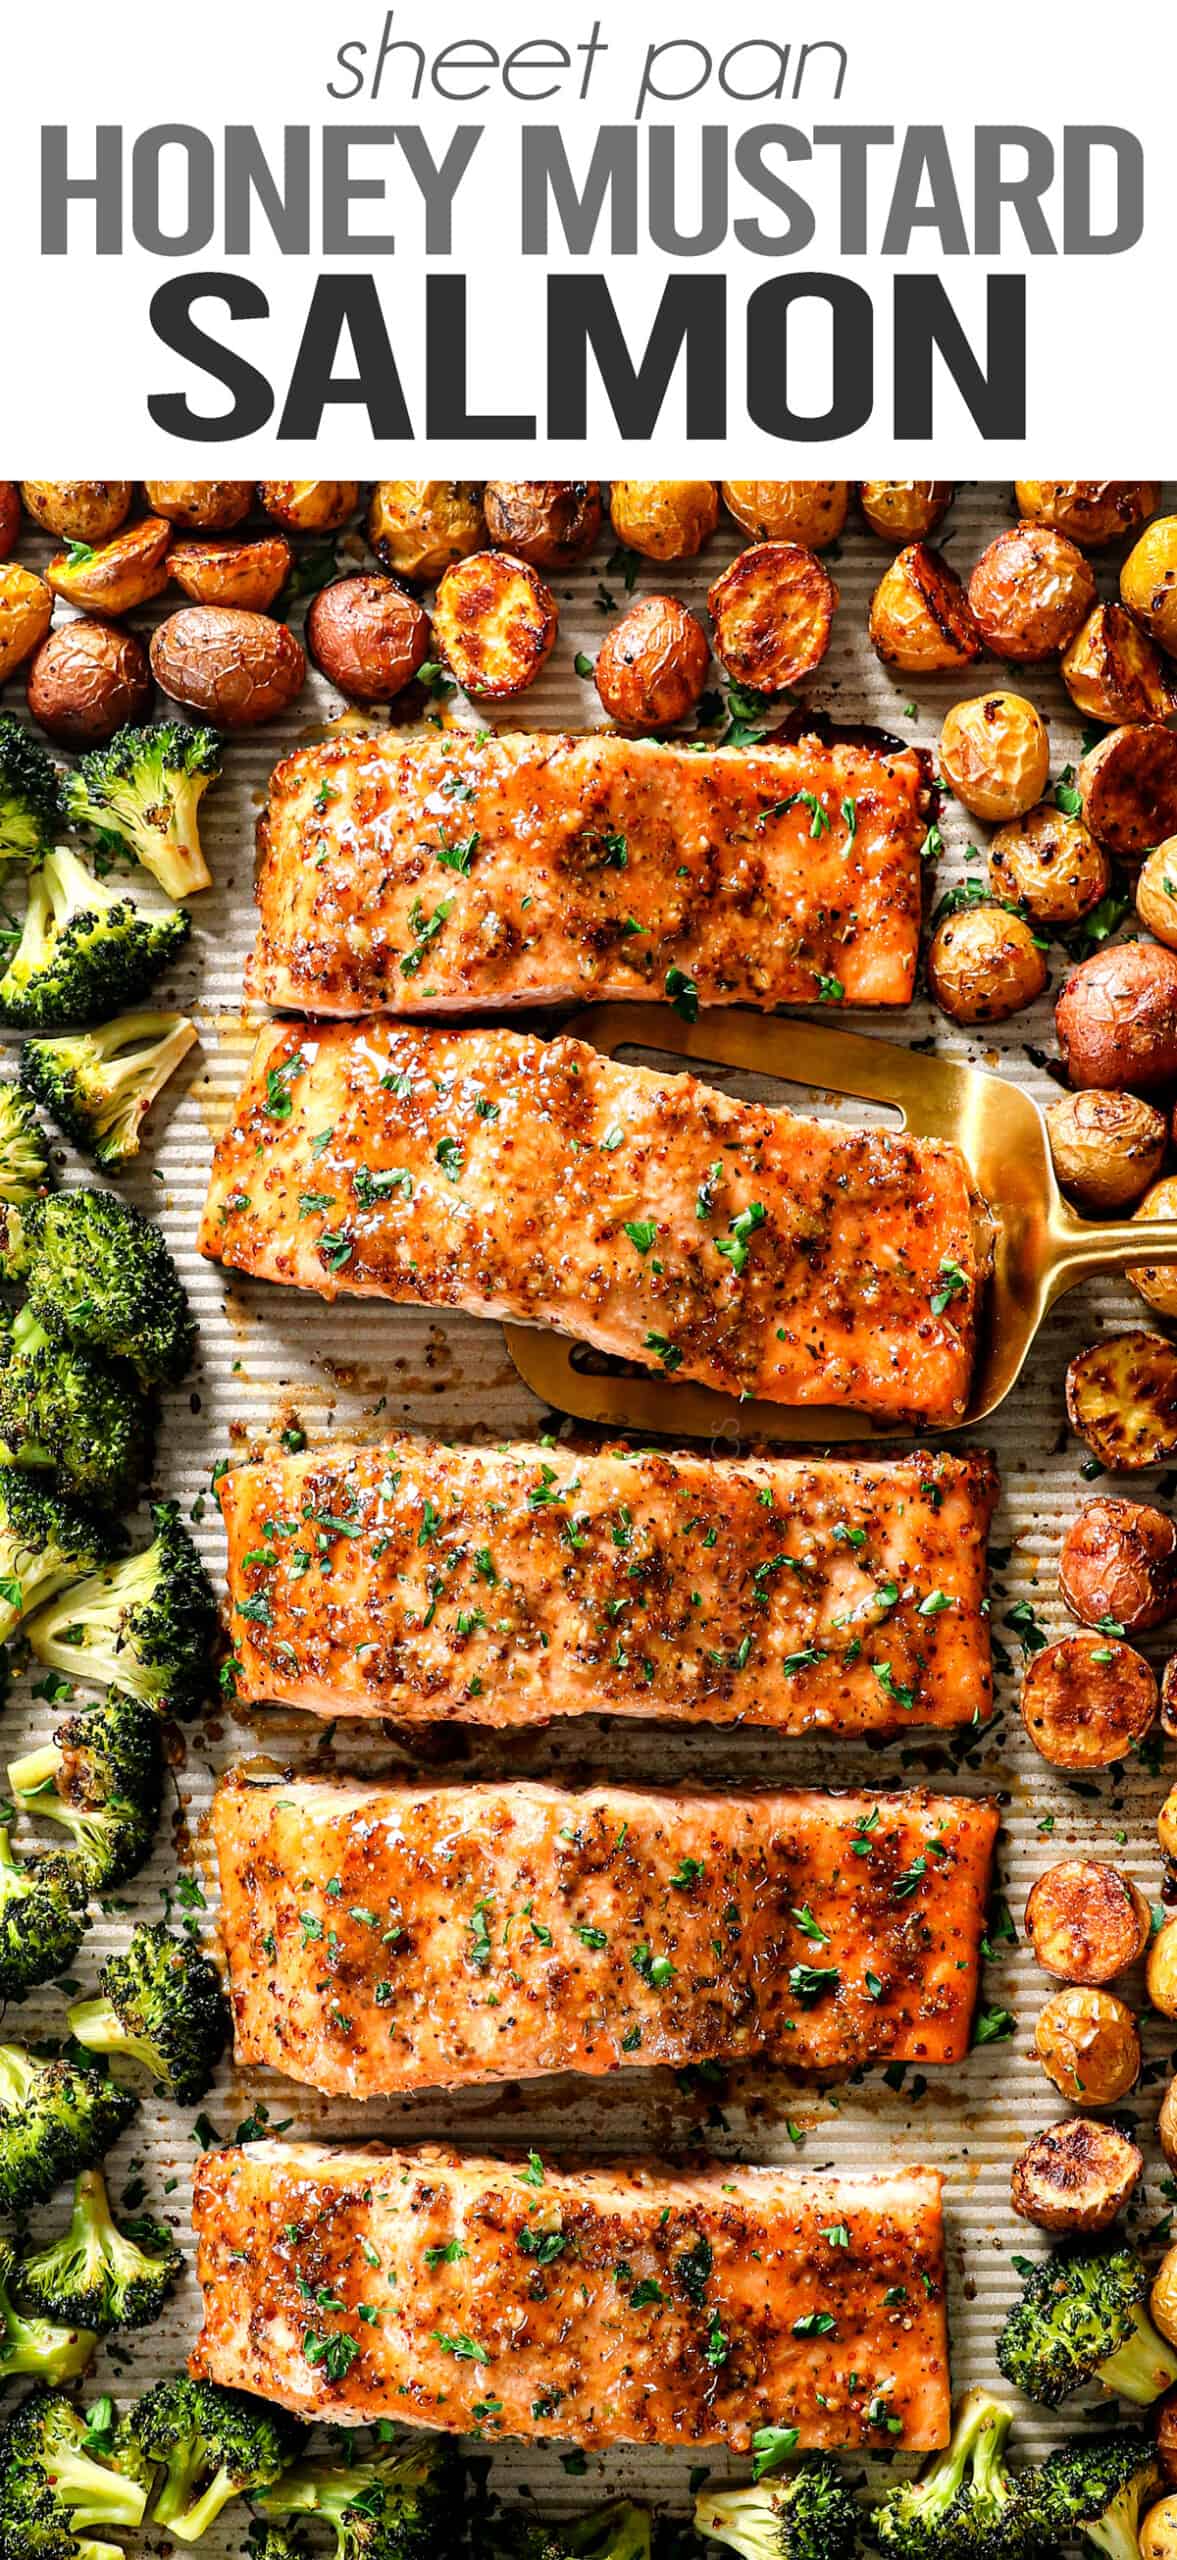 honey mustard salmon baked on a sheet pan with broccoli and potatoes